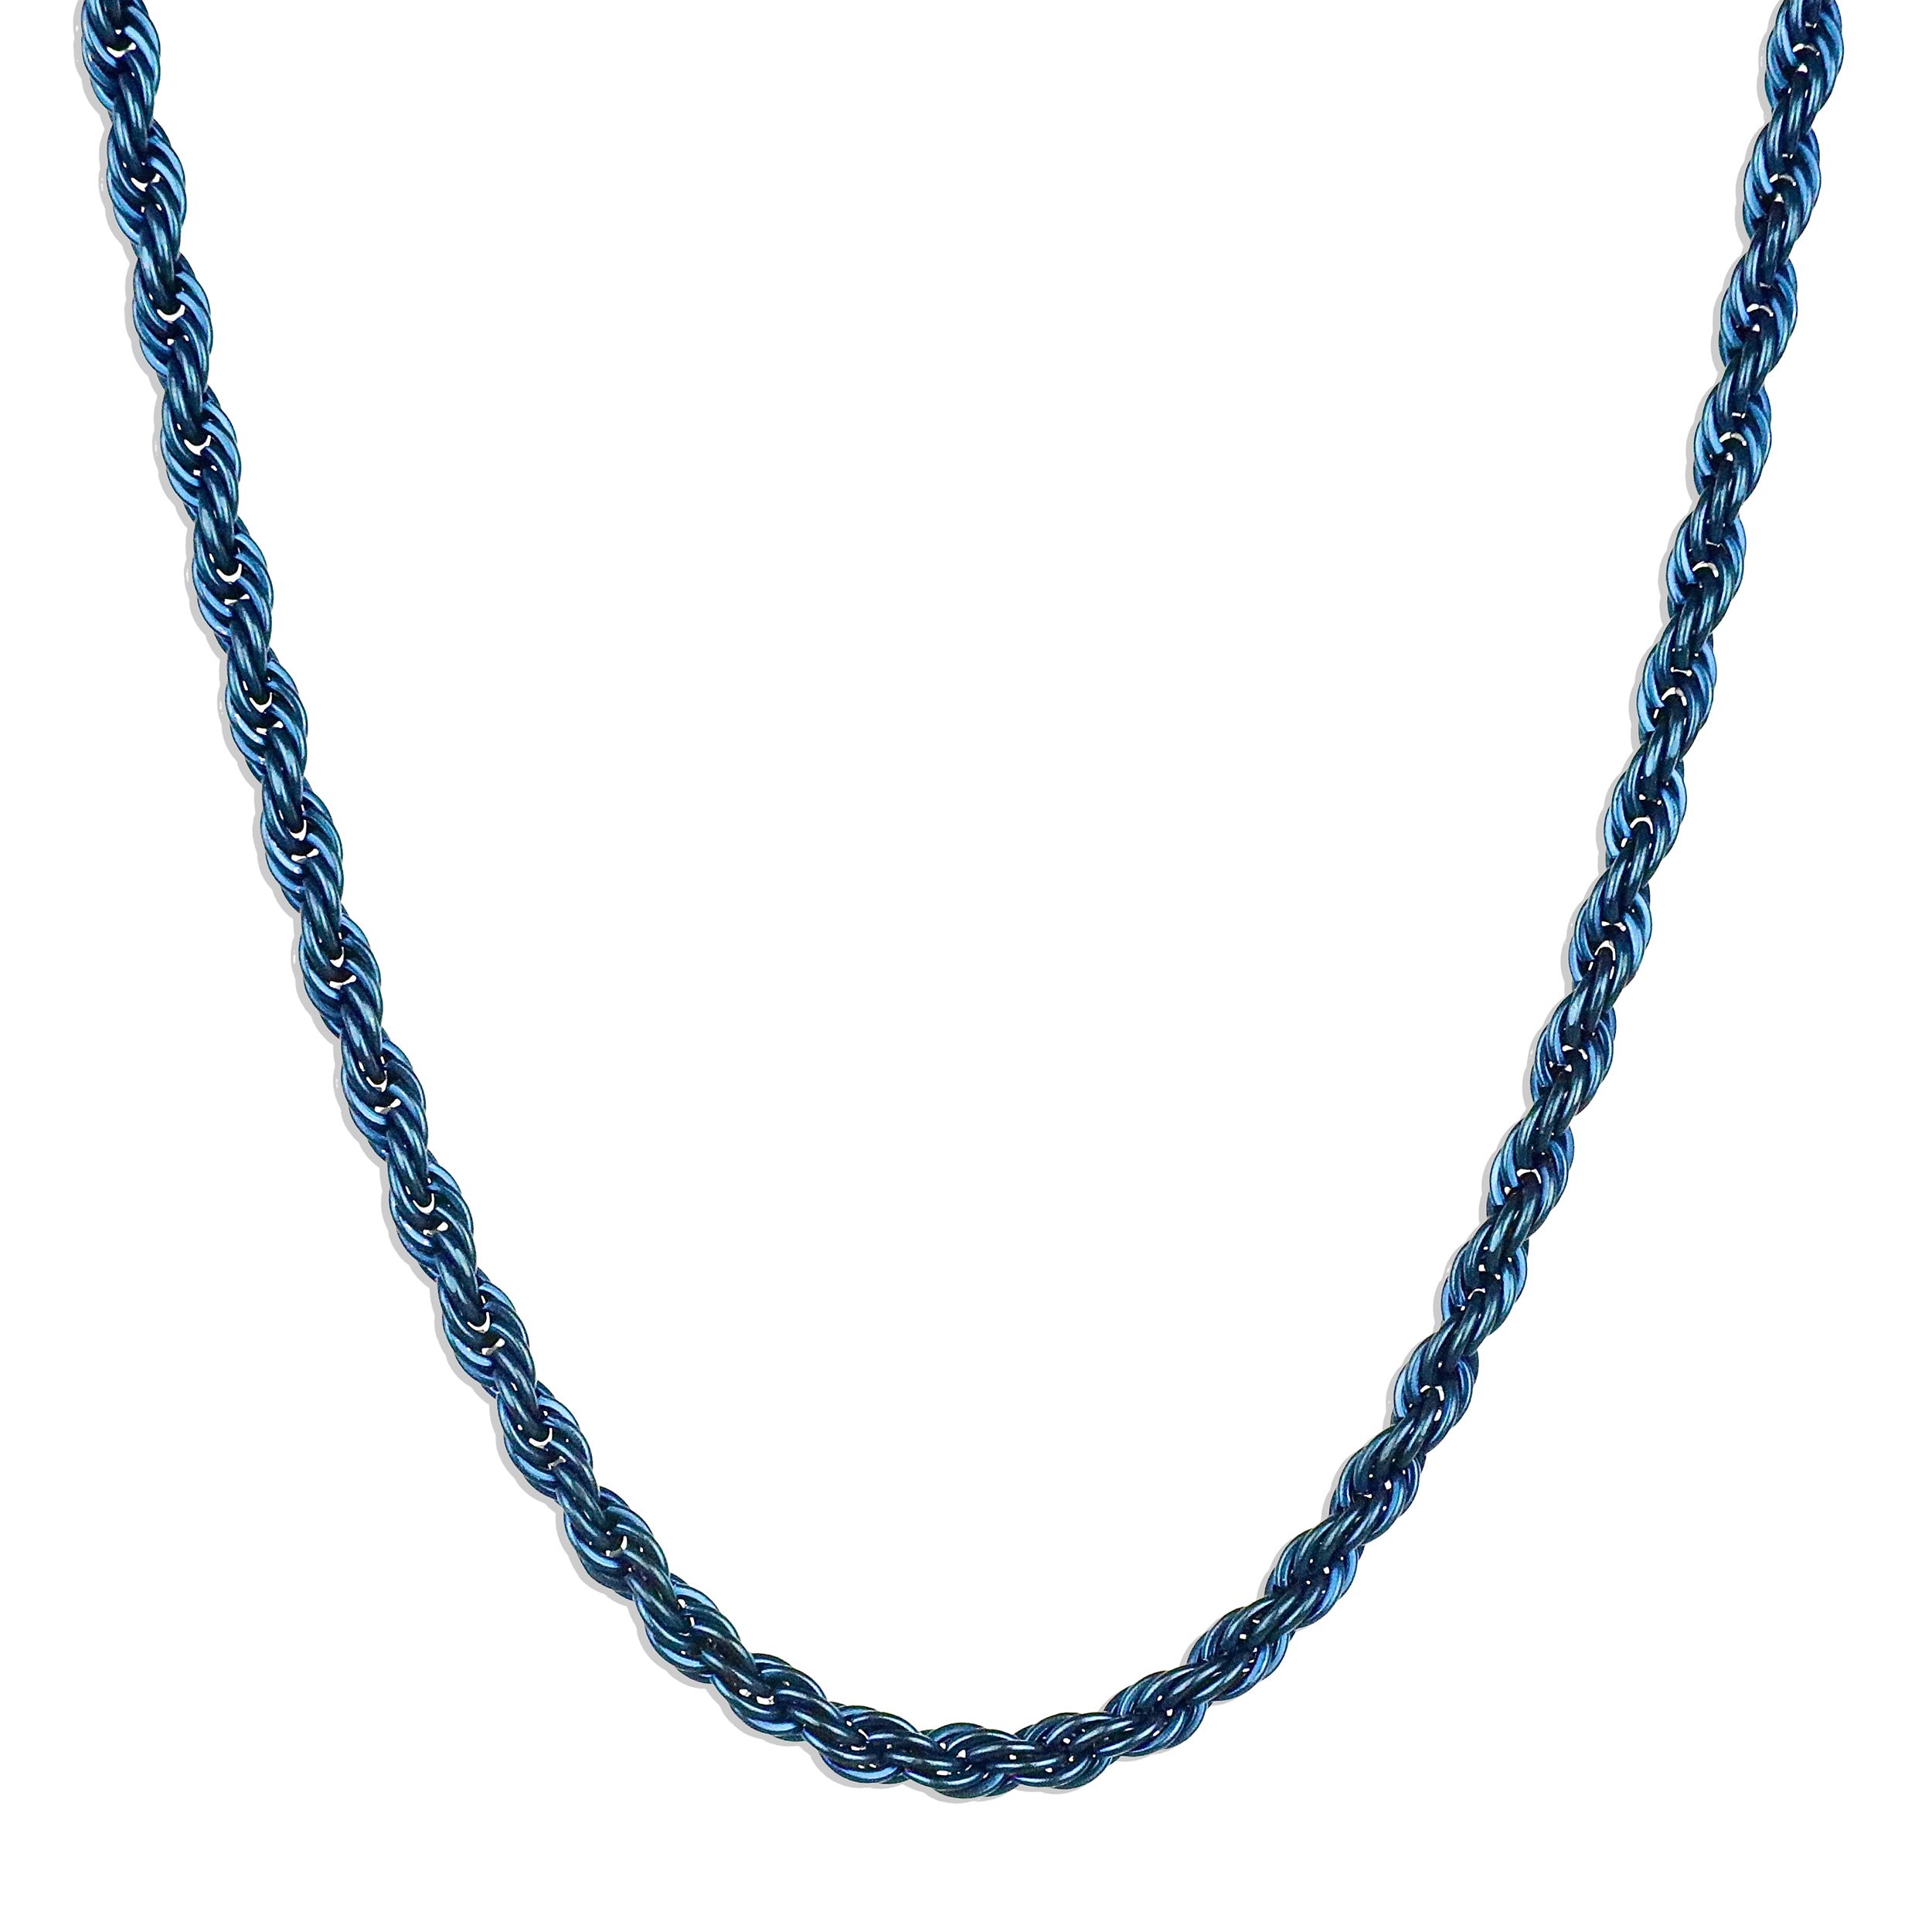 Rope Chain Necklace - Cobalt Blue 4mm